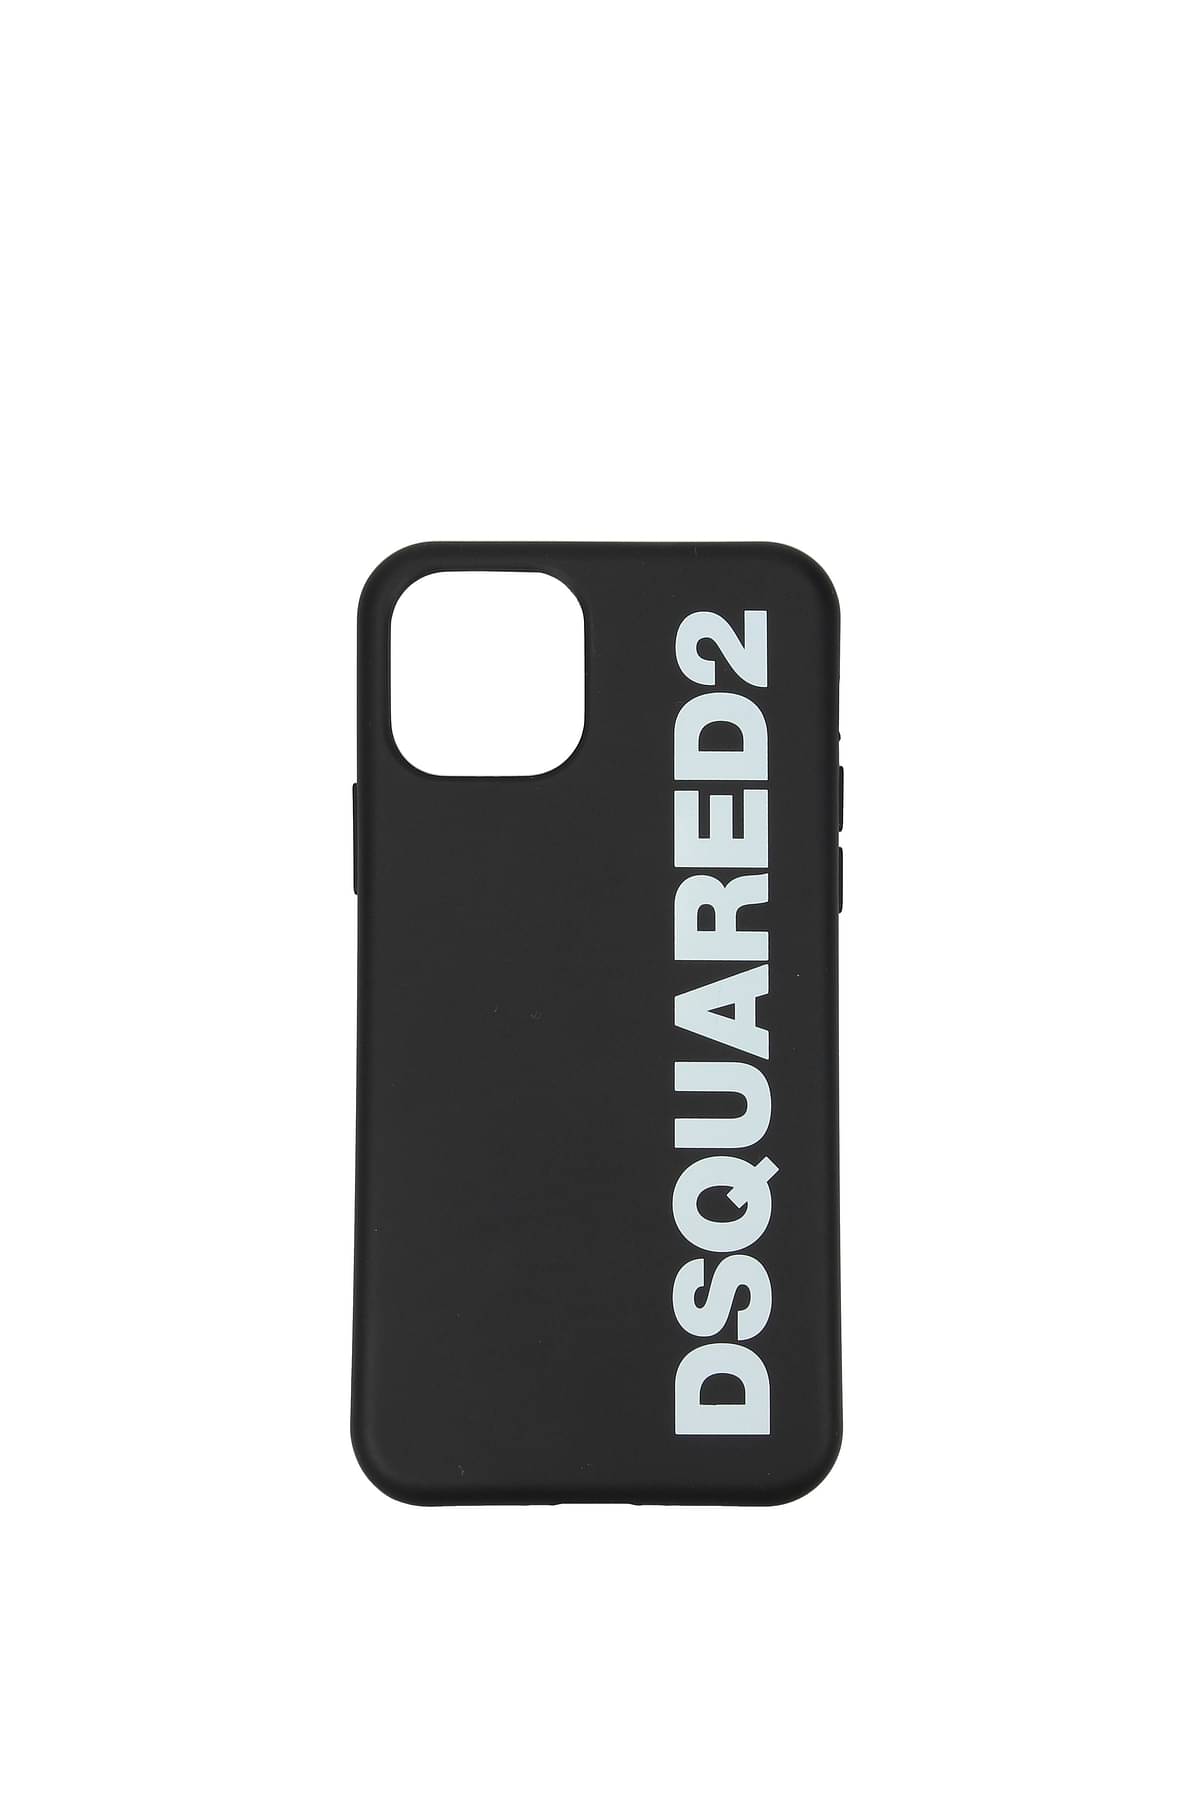 Overgave limiet ingesteld Dsquared2 iPhone cover iphone 11 pro Men ITM009255000001M063 Thermoplastic  42€